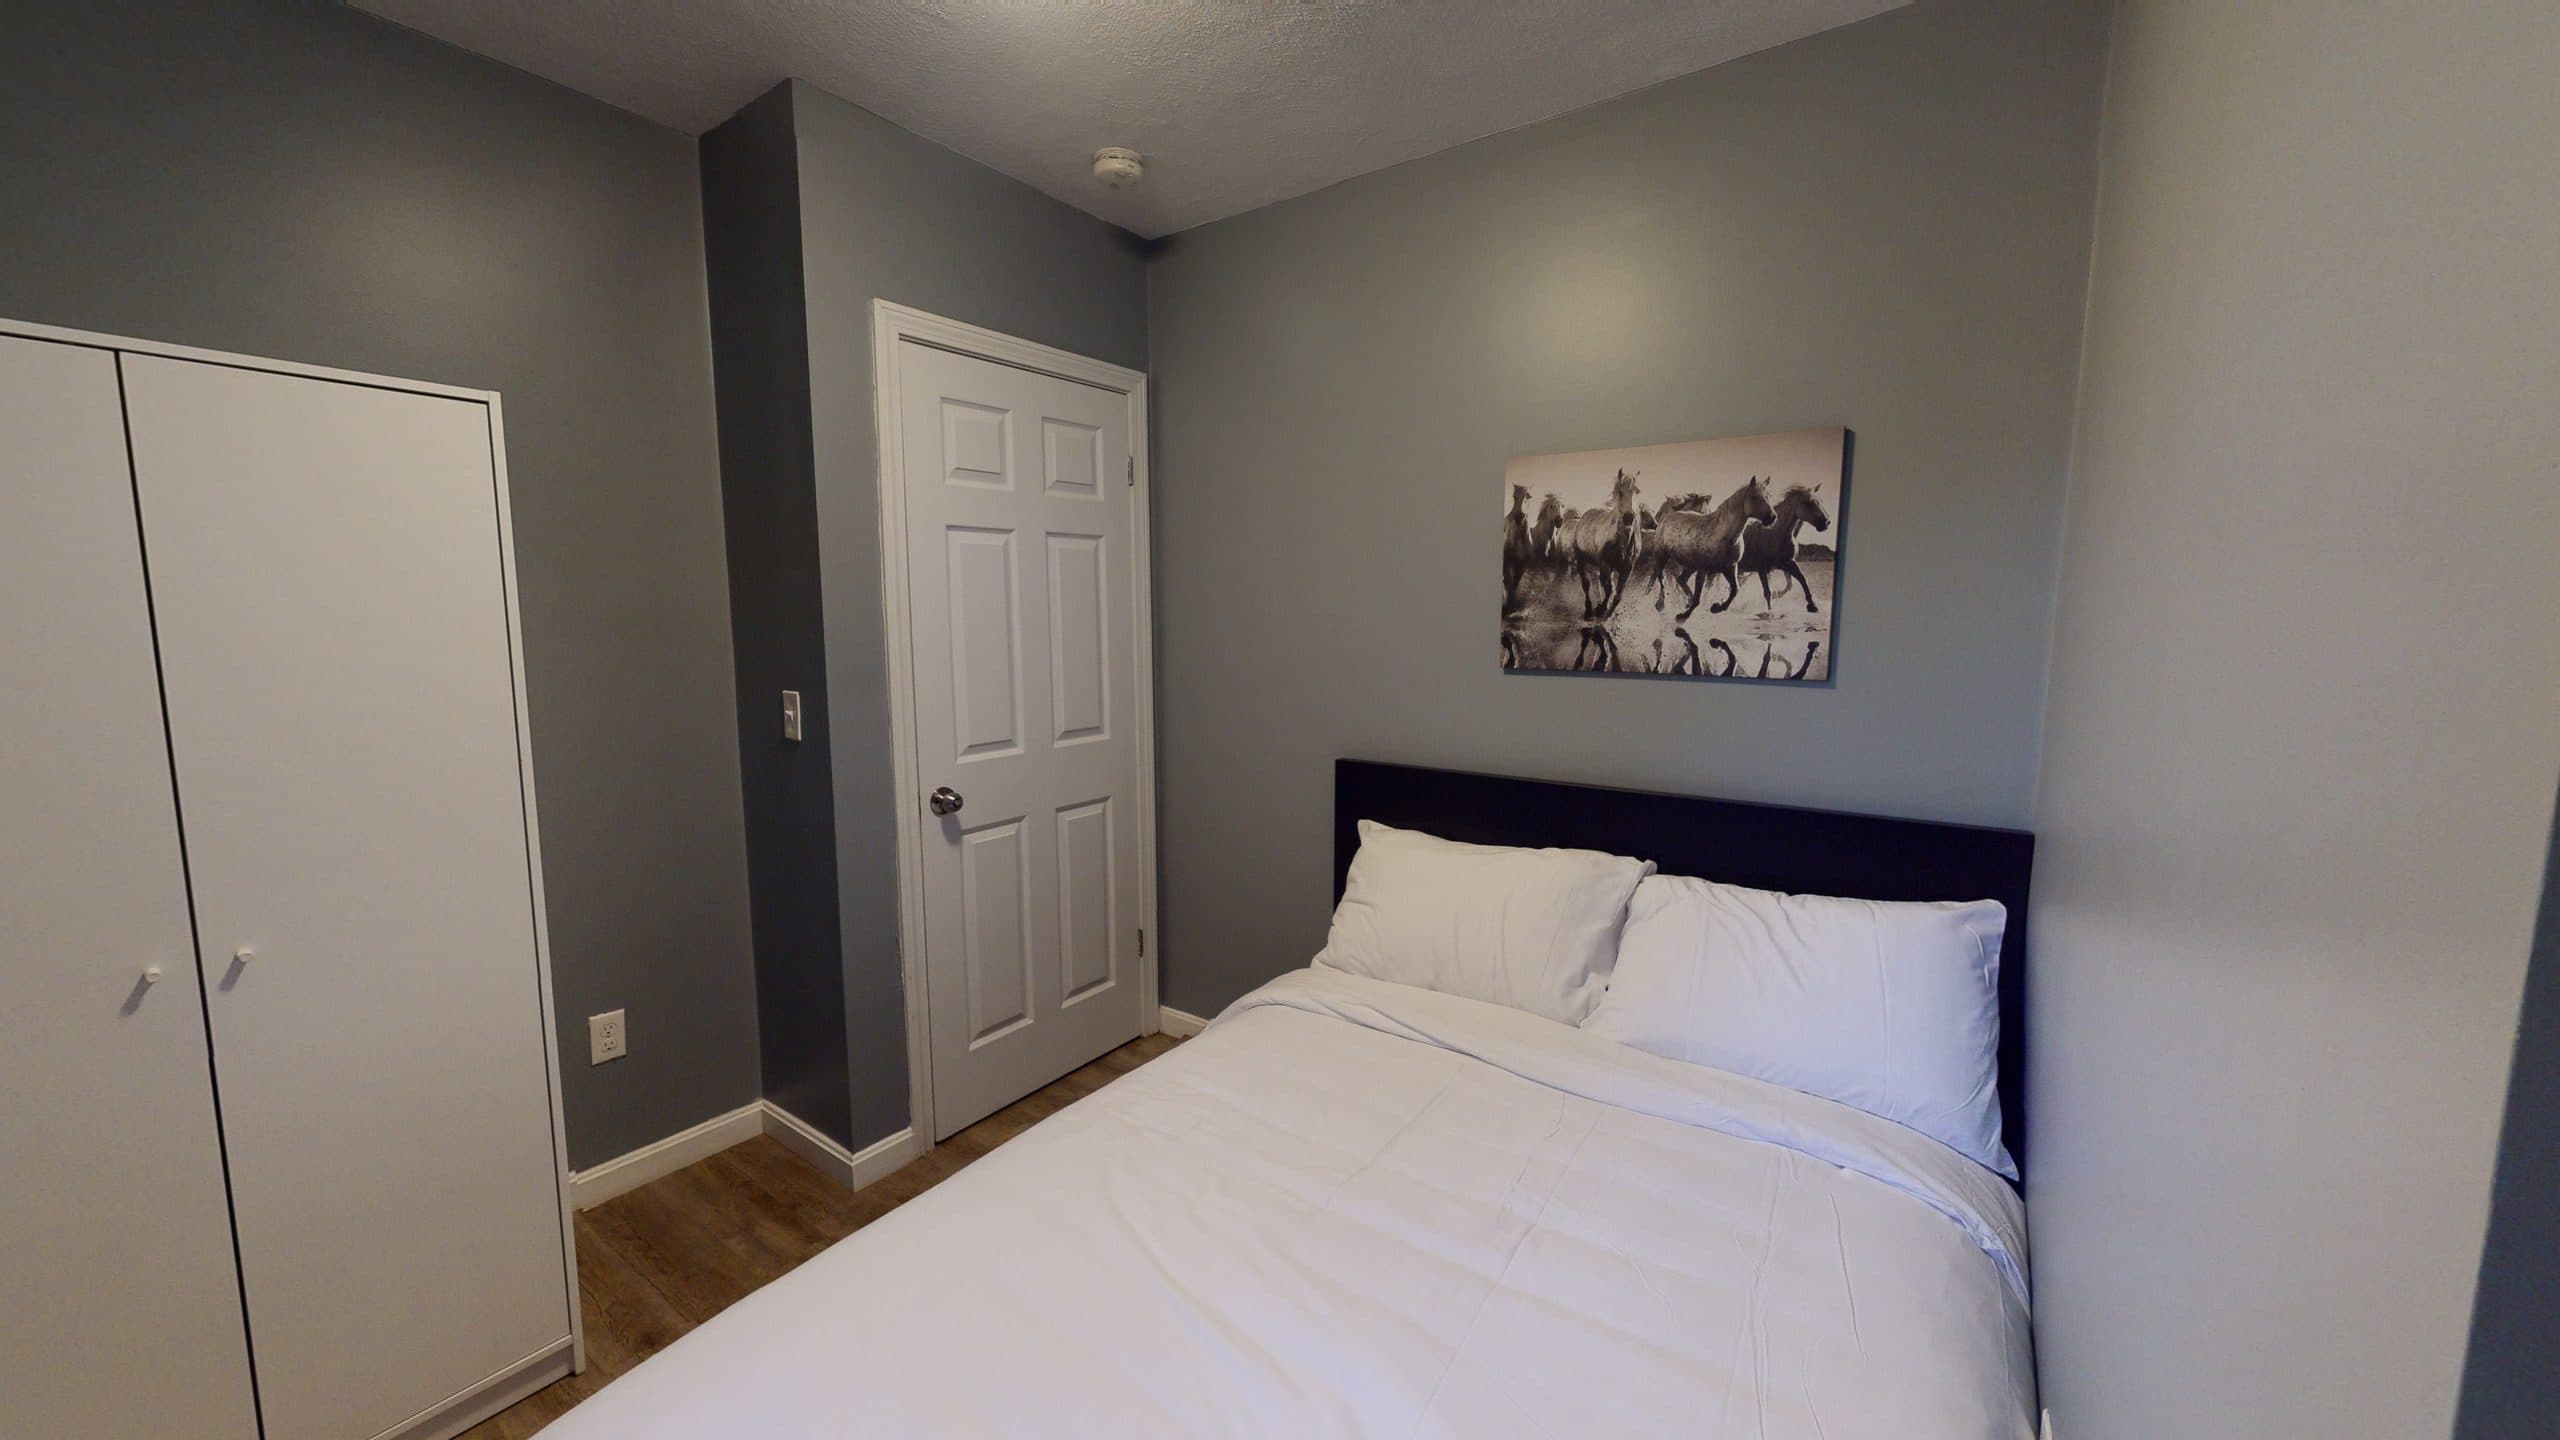 Photo 12 of #1287: Queen Bedroom A at June Homes